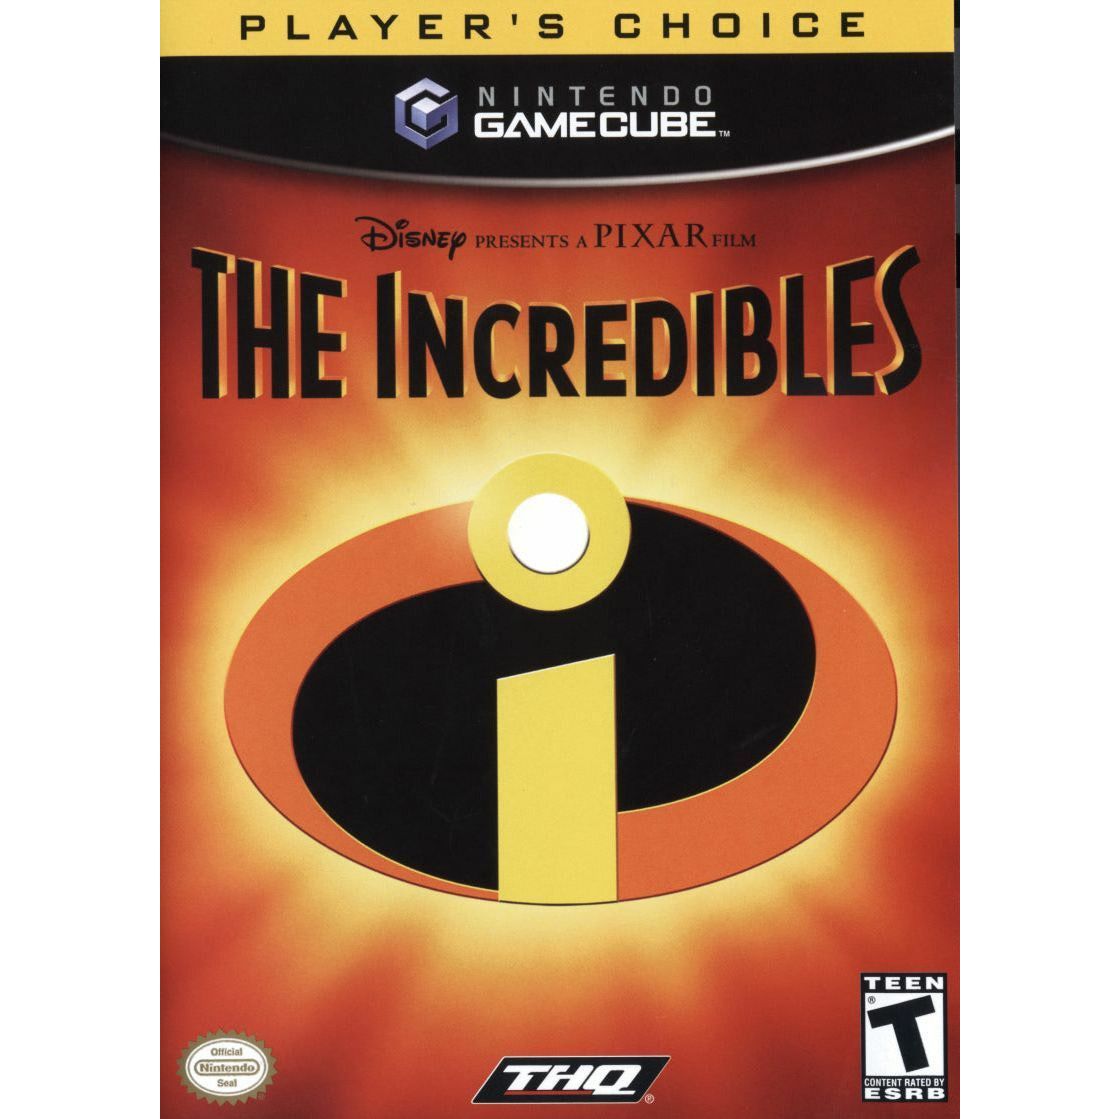 GameCube - The Incredibles Player's Choice